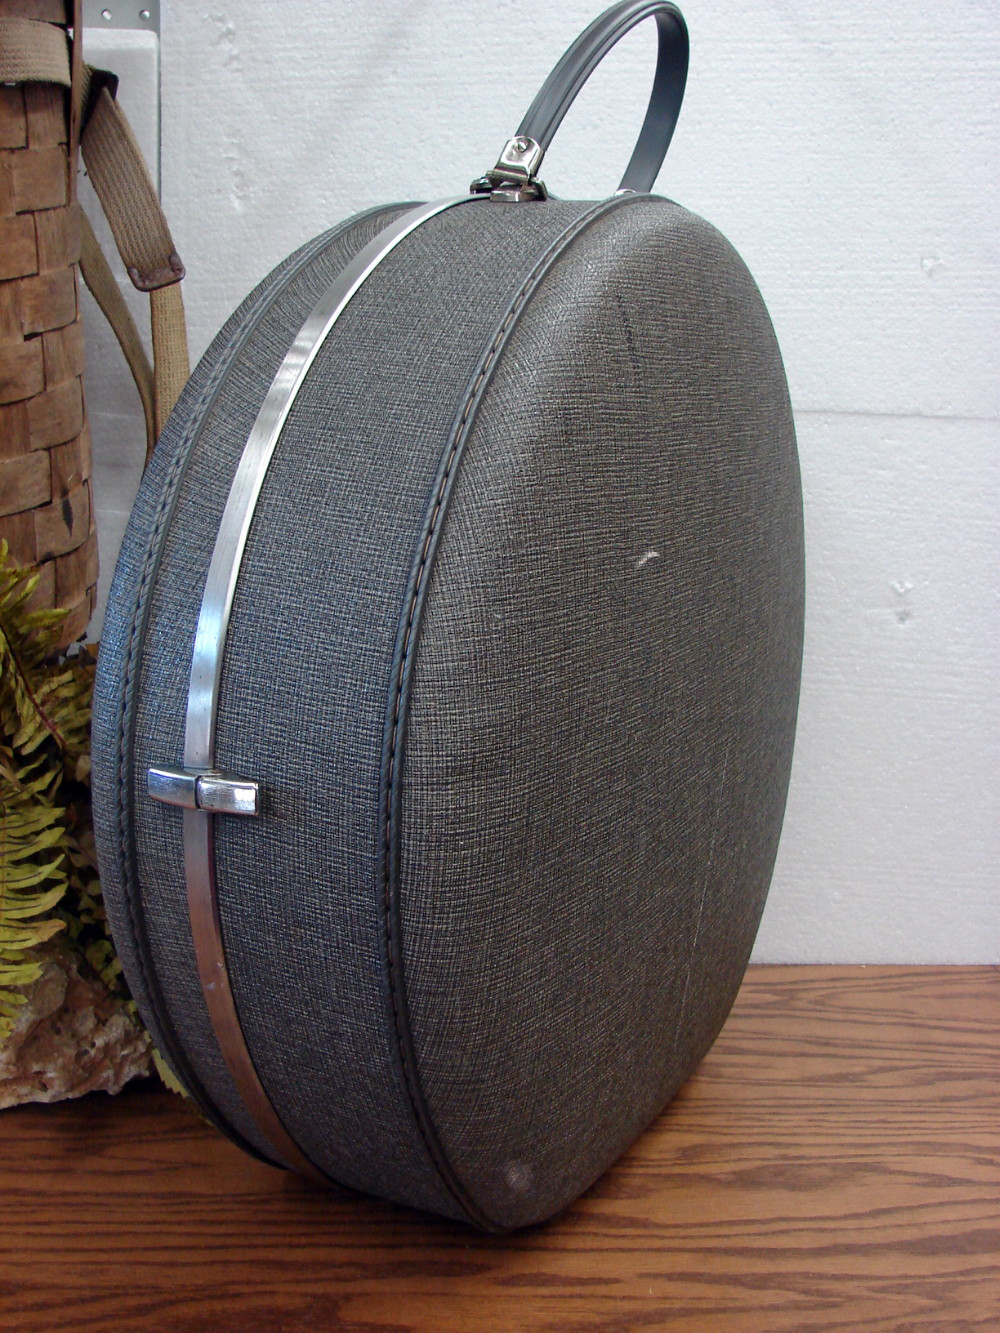 hat box luggage with wheels